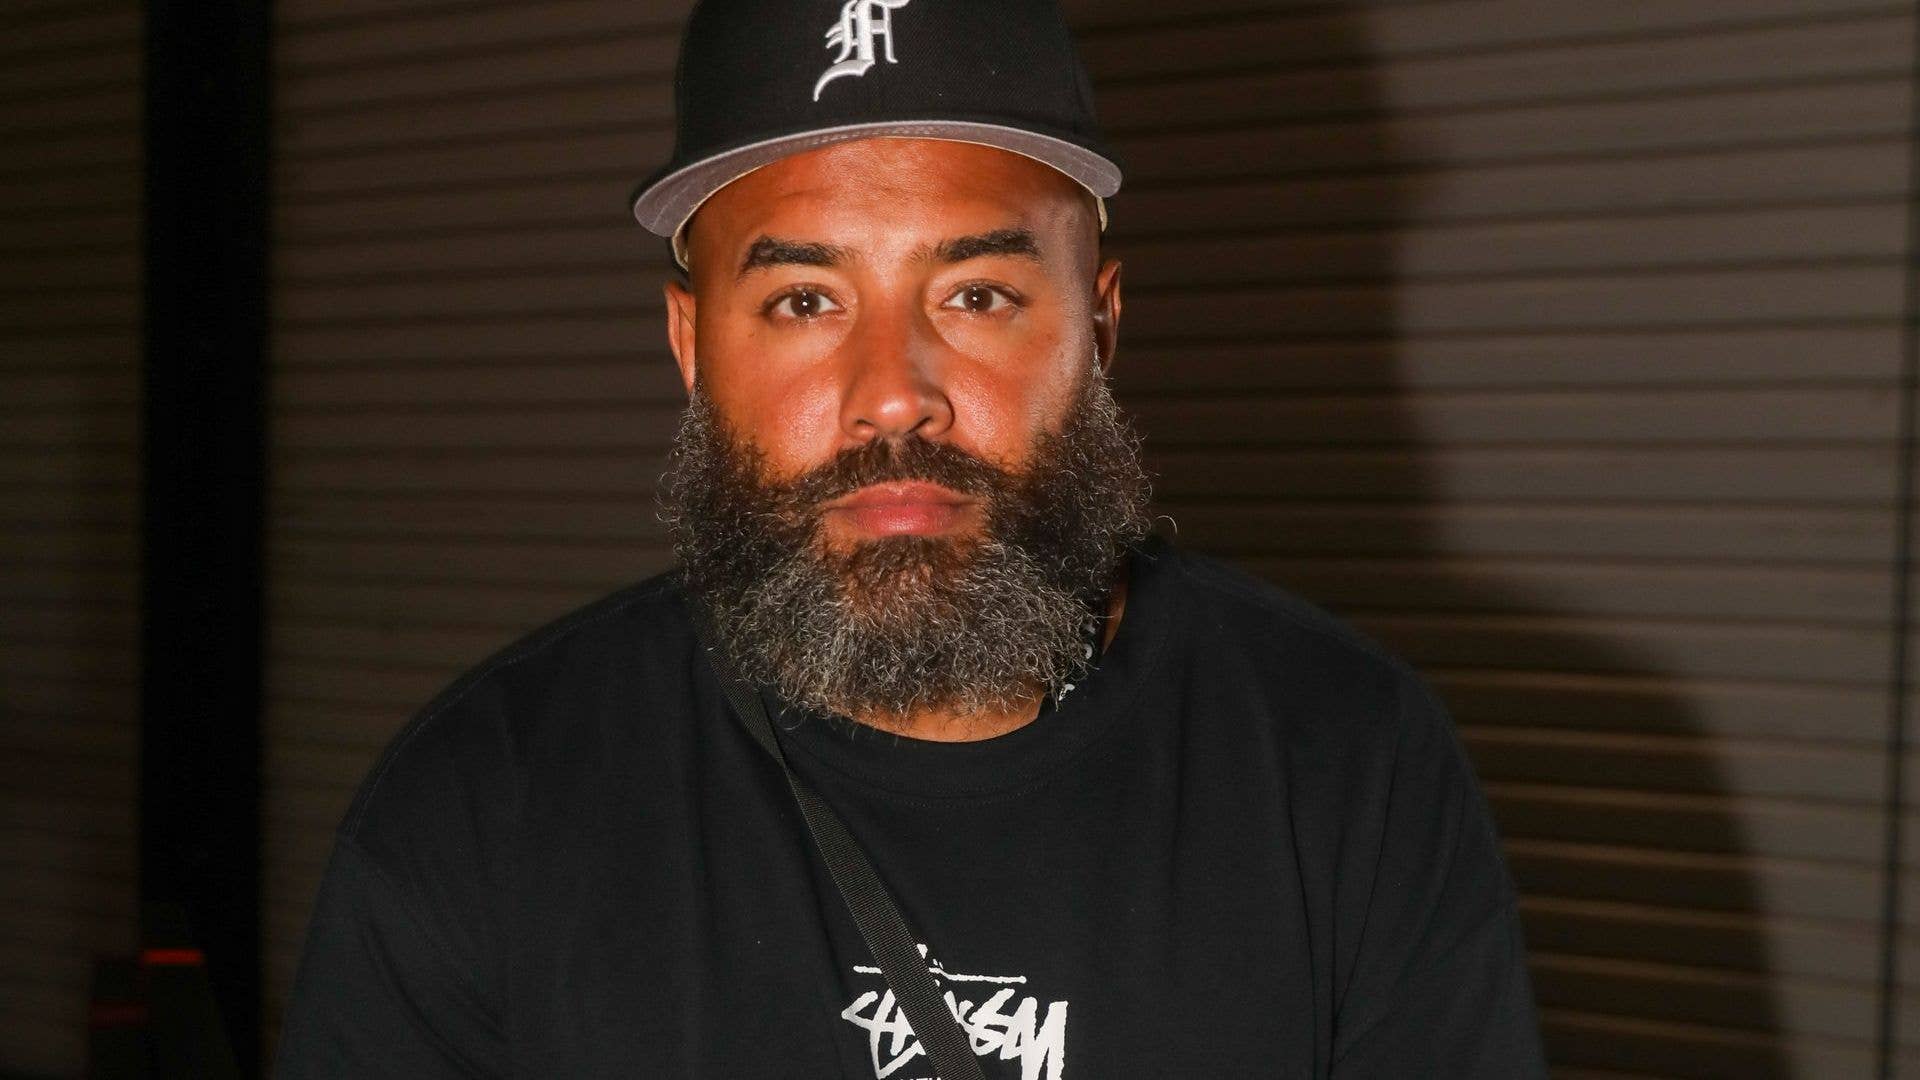 Ebro poses for a photo at Summer Jam 2021